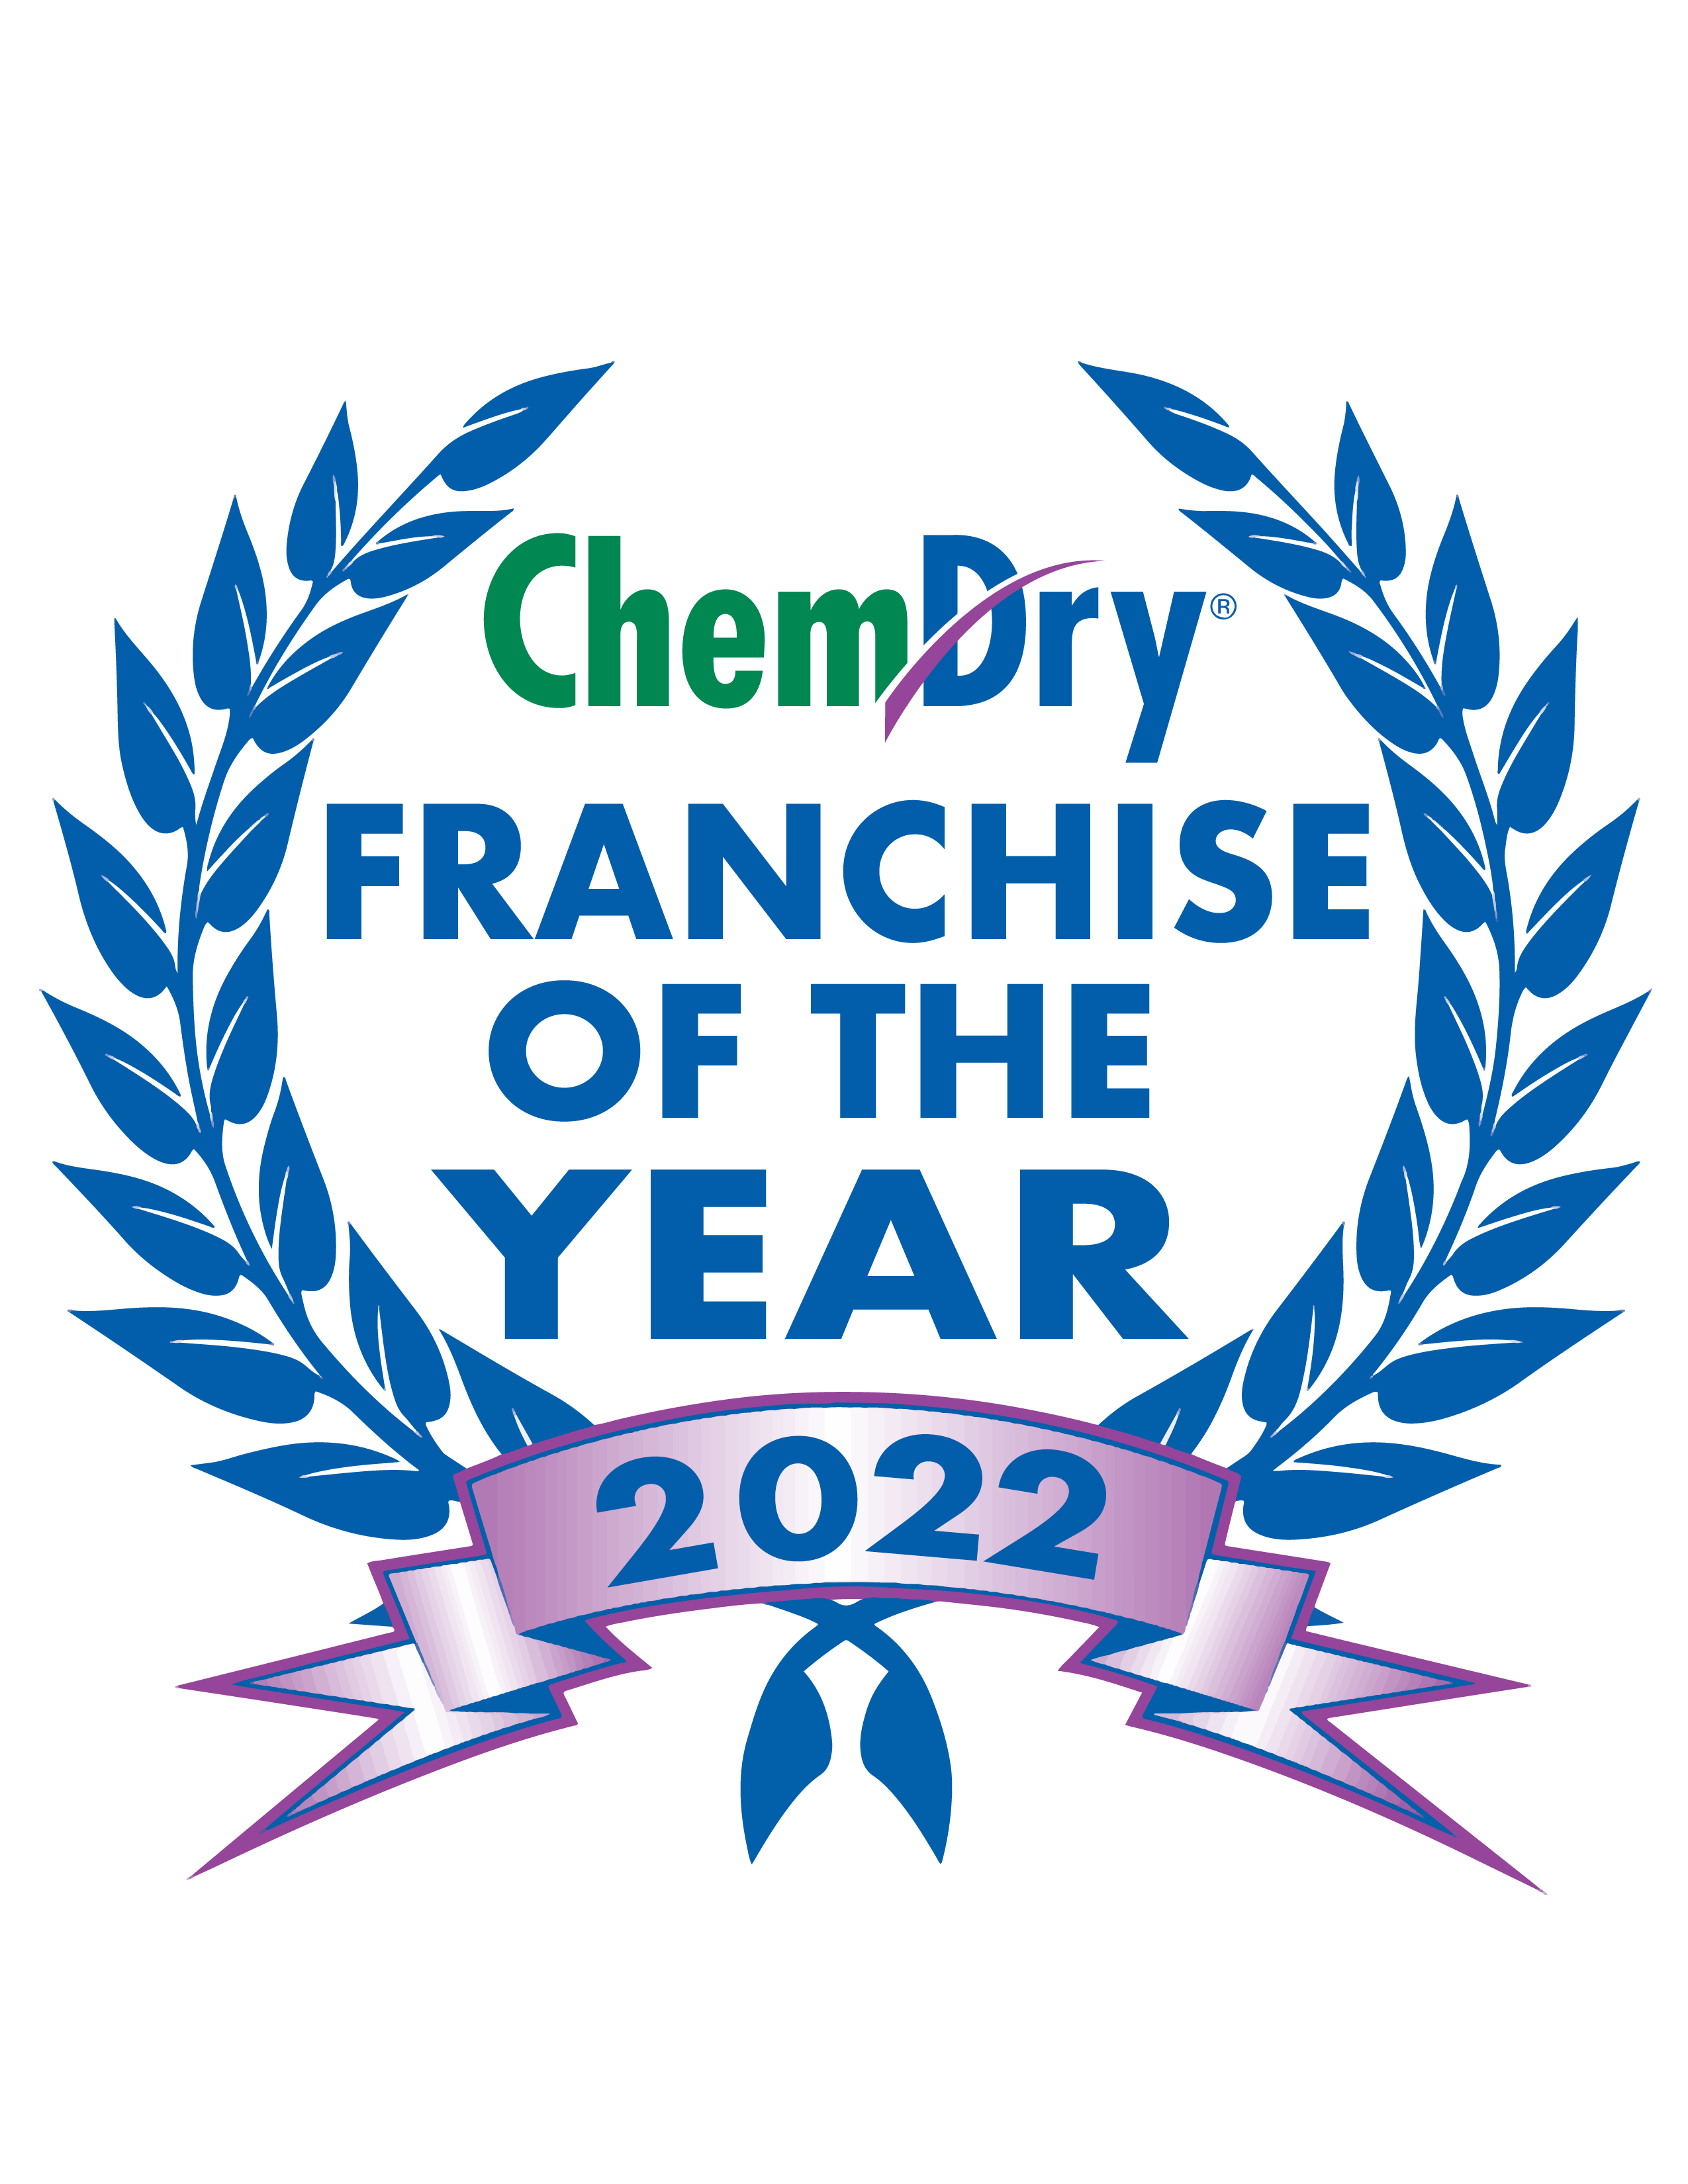 Mesa Carpet Cleaning Company Named National Franchise of the Year